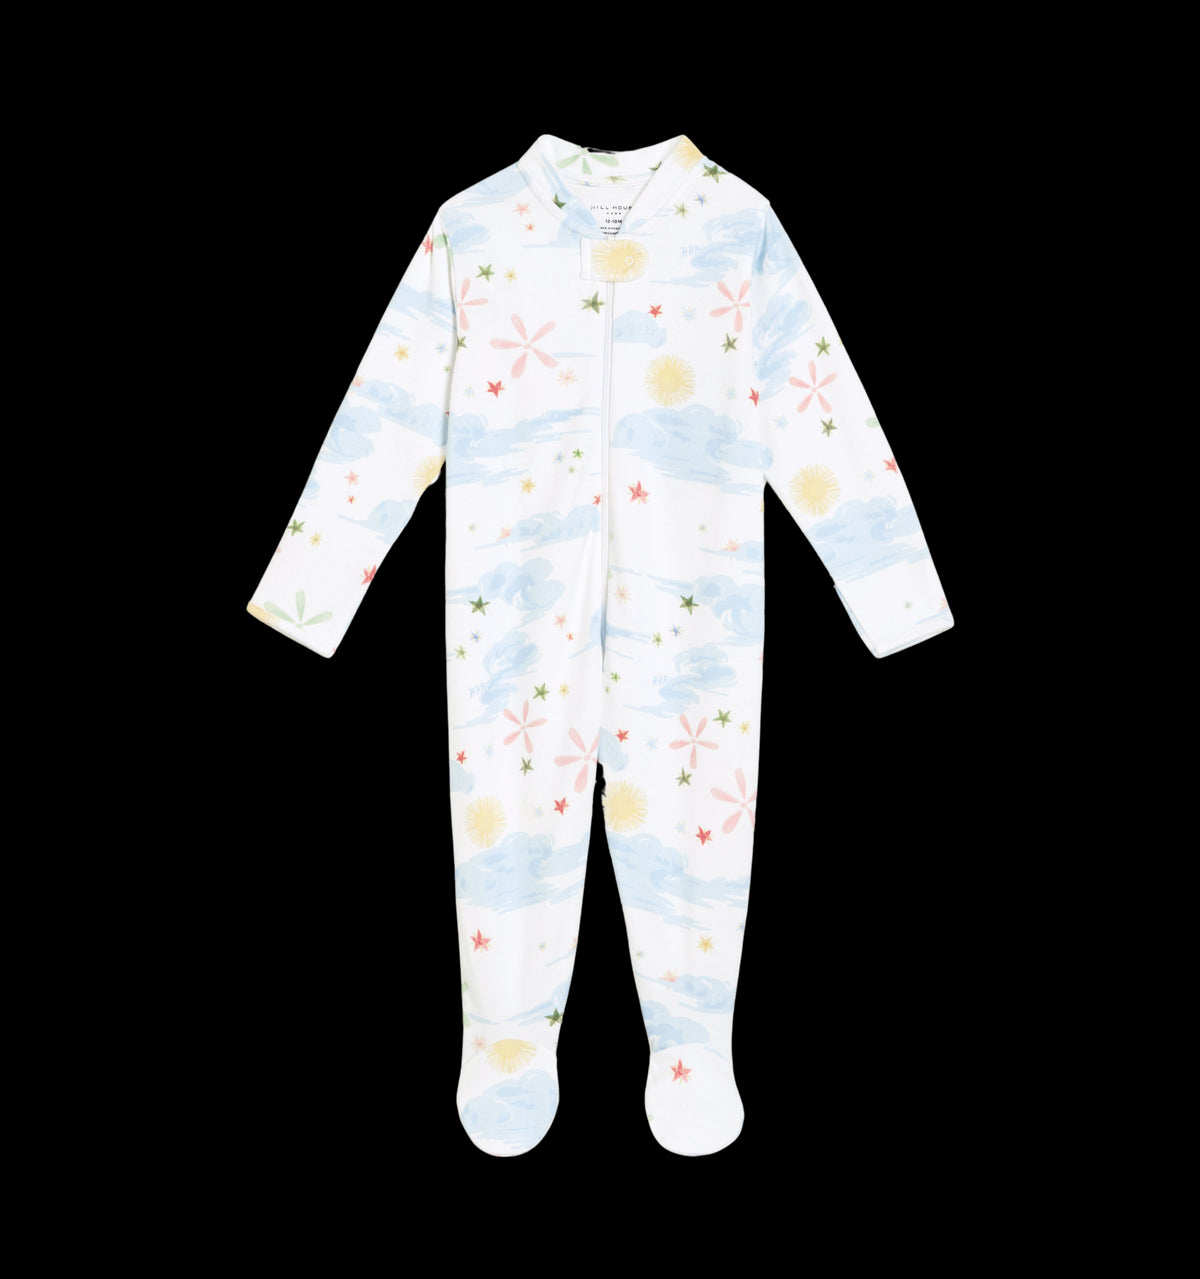 The Onesie in Celestial Floral